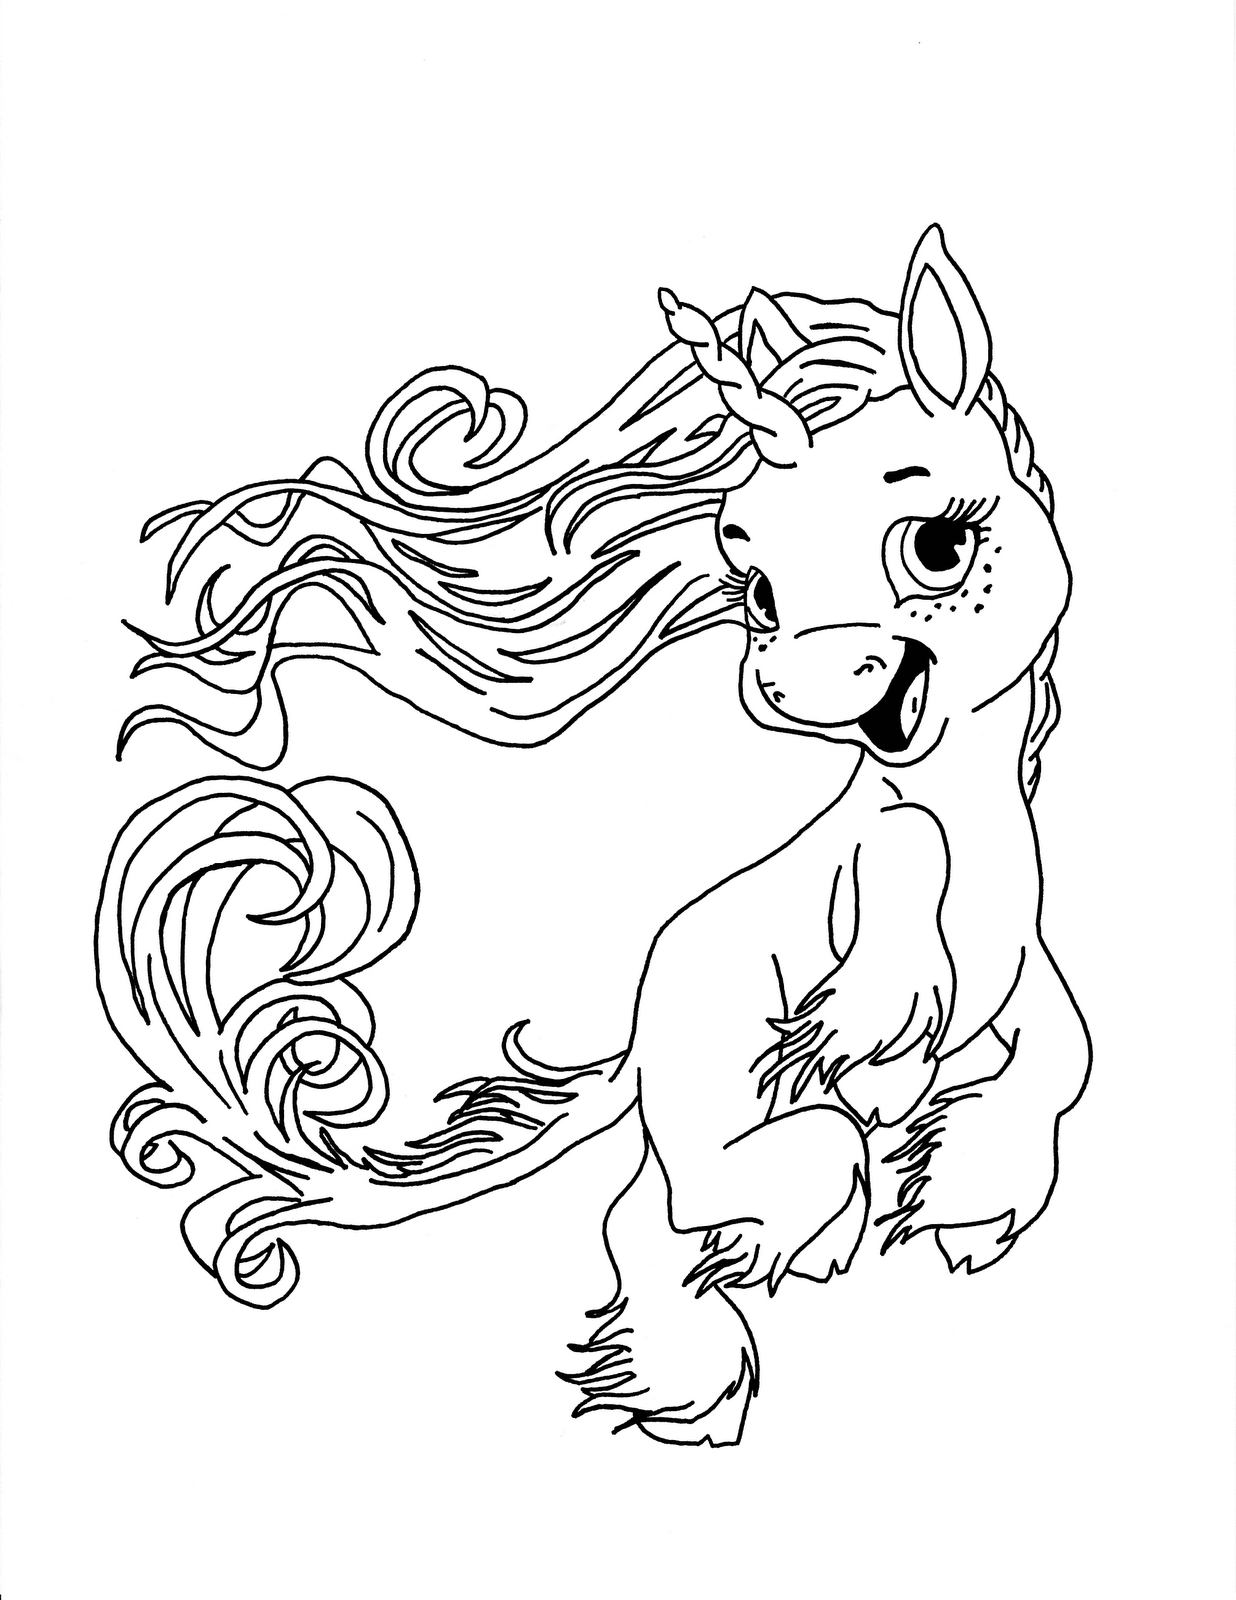 Happy Unicorn Coloring Page   Free Printable Coloring ...